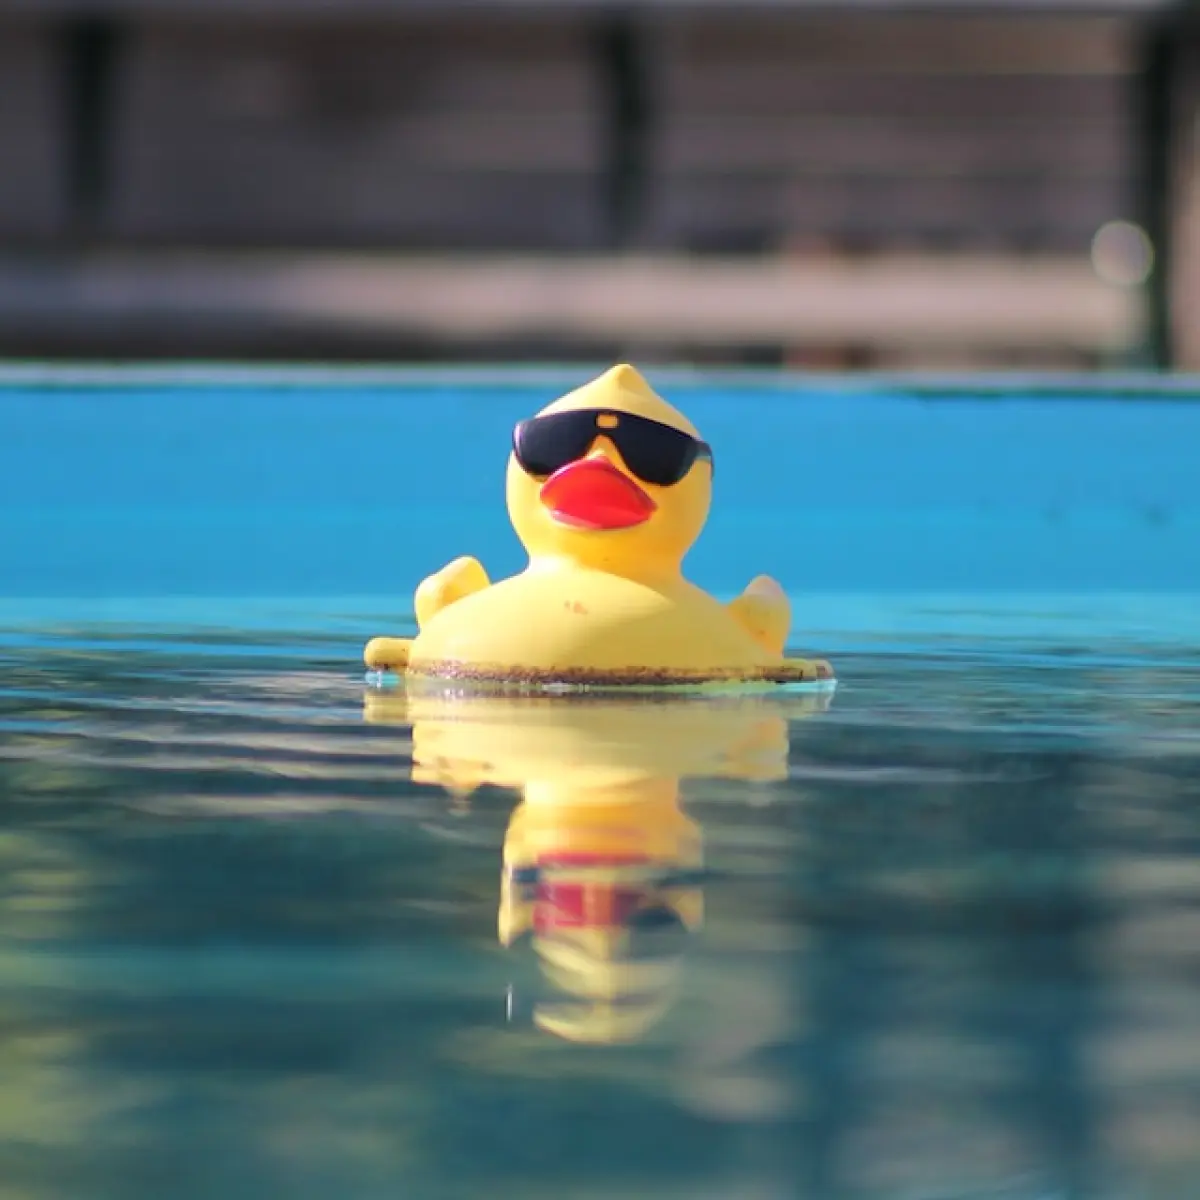 Photo: a yellow rubber duck wearing sunglasses floating in a pool.